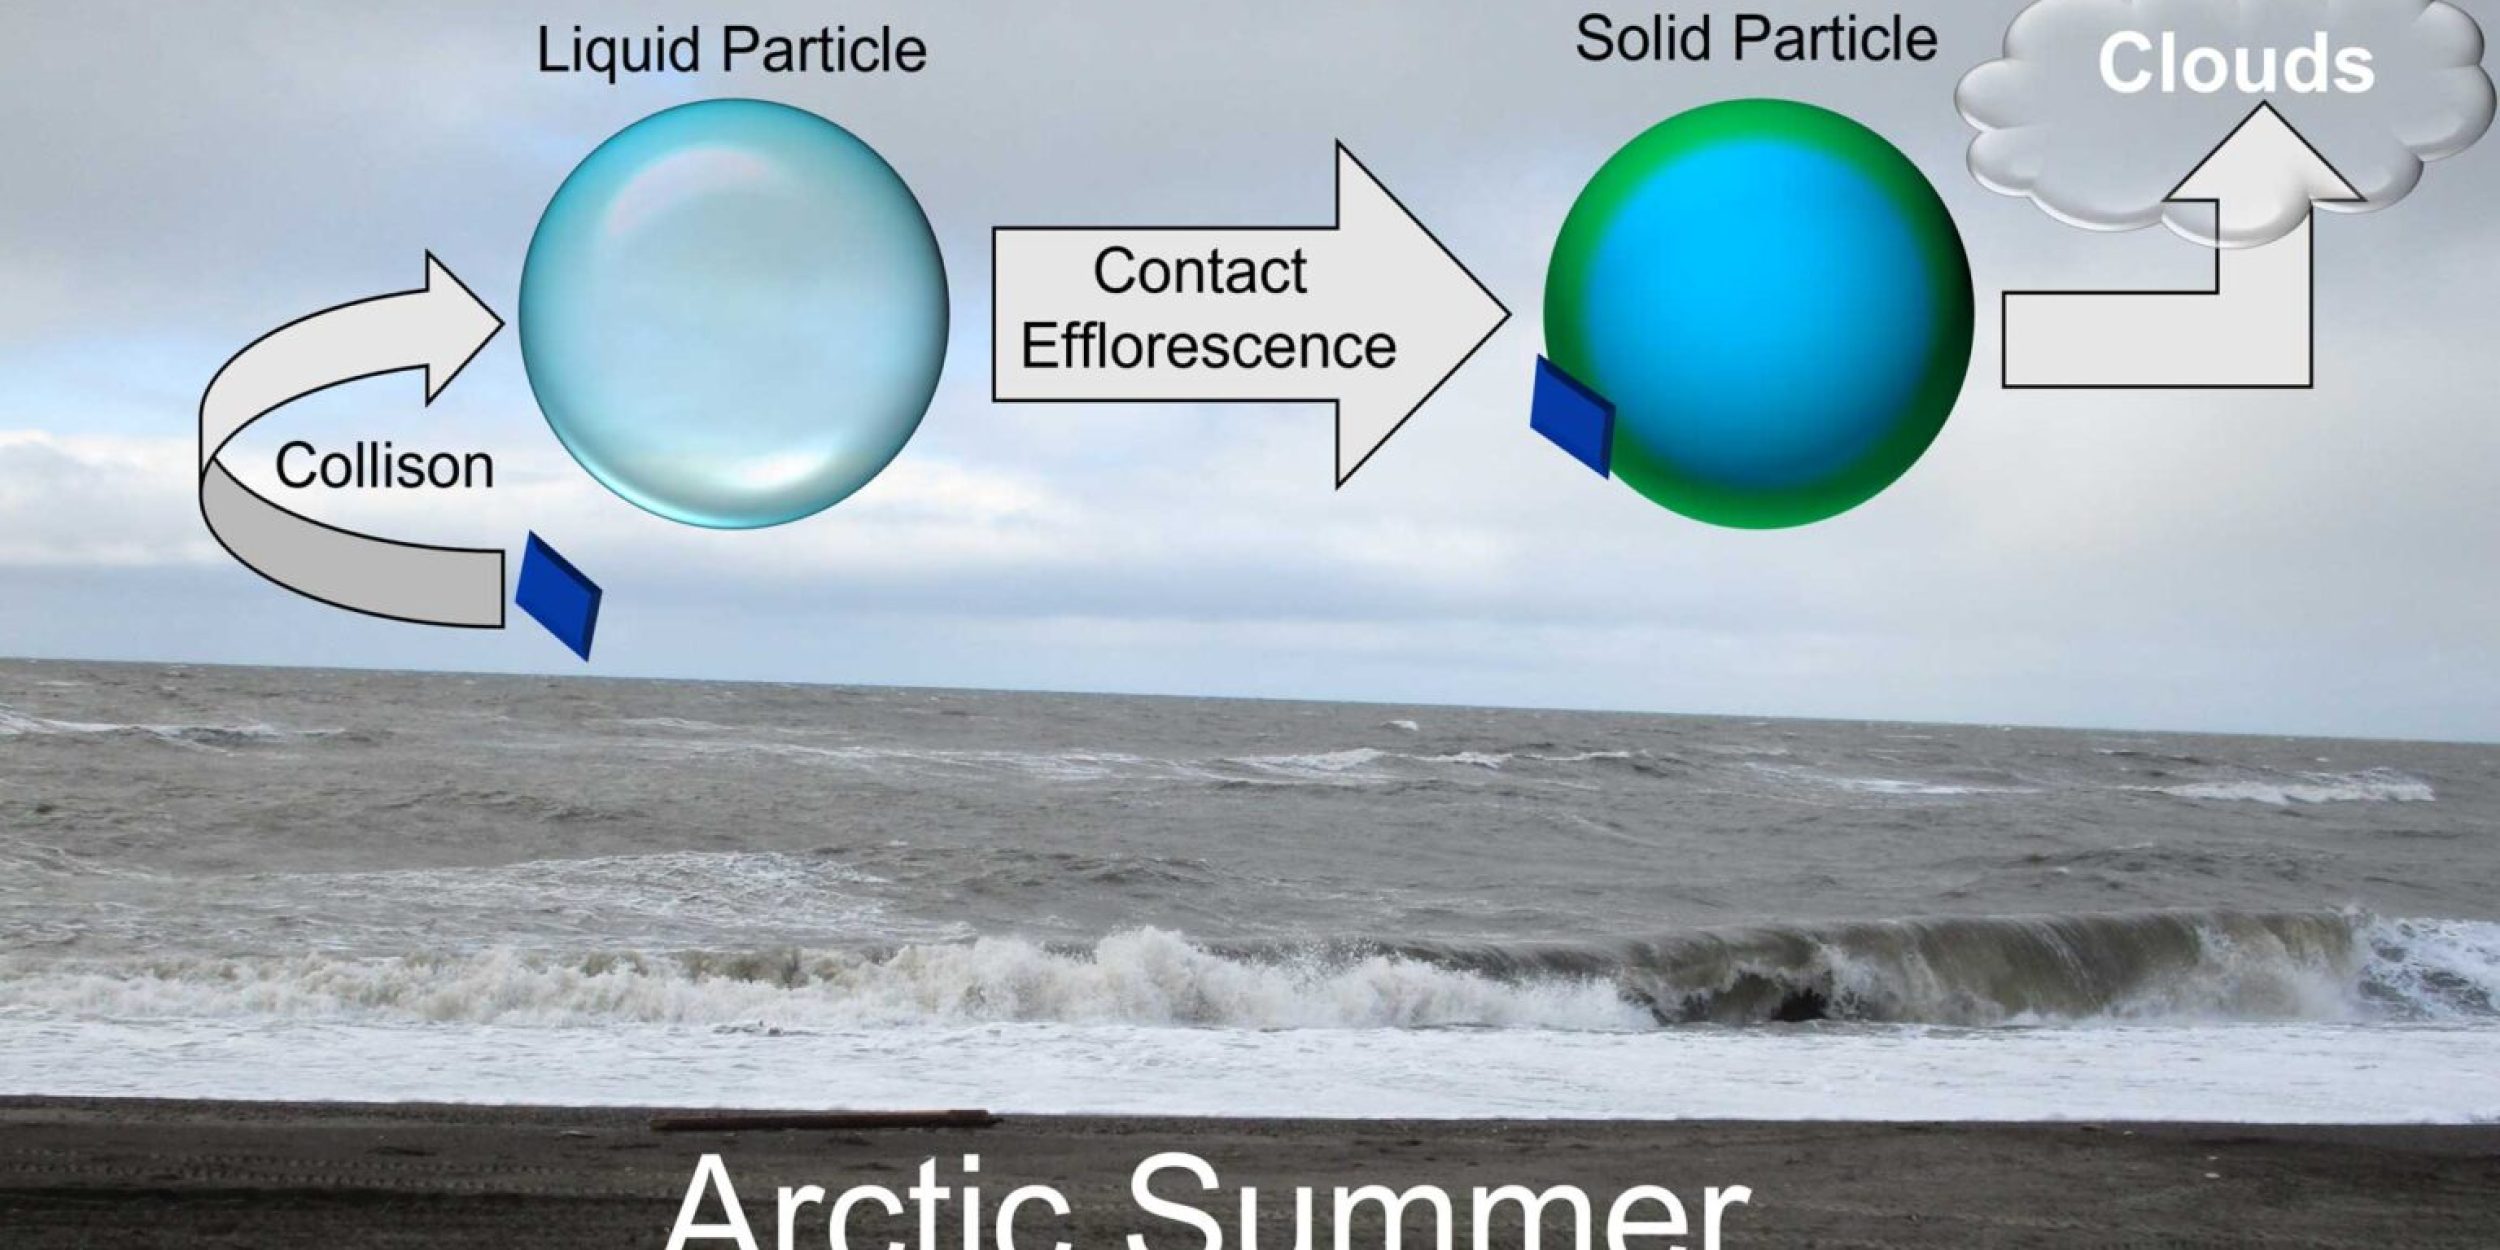 img-solid-aerosols-found-in-arctic-atmosphere-could-impact-cloud-formation-and-climate-arctic-summer-1536x831